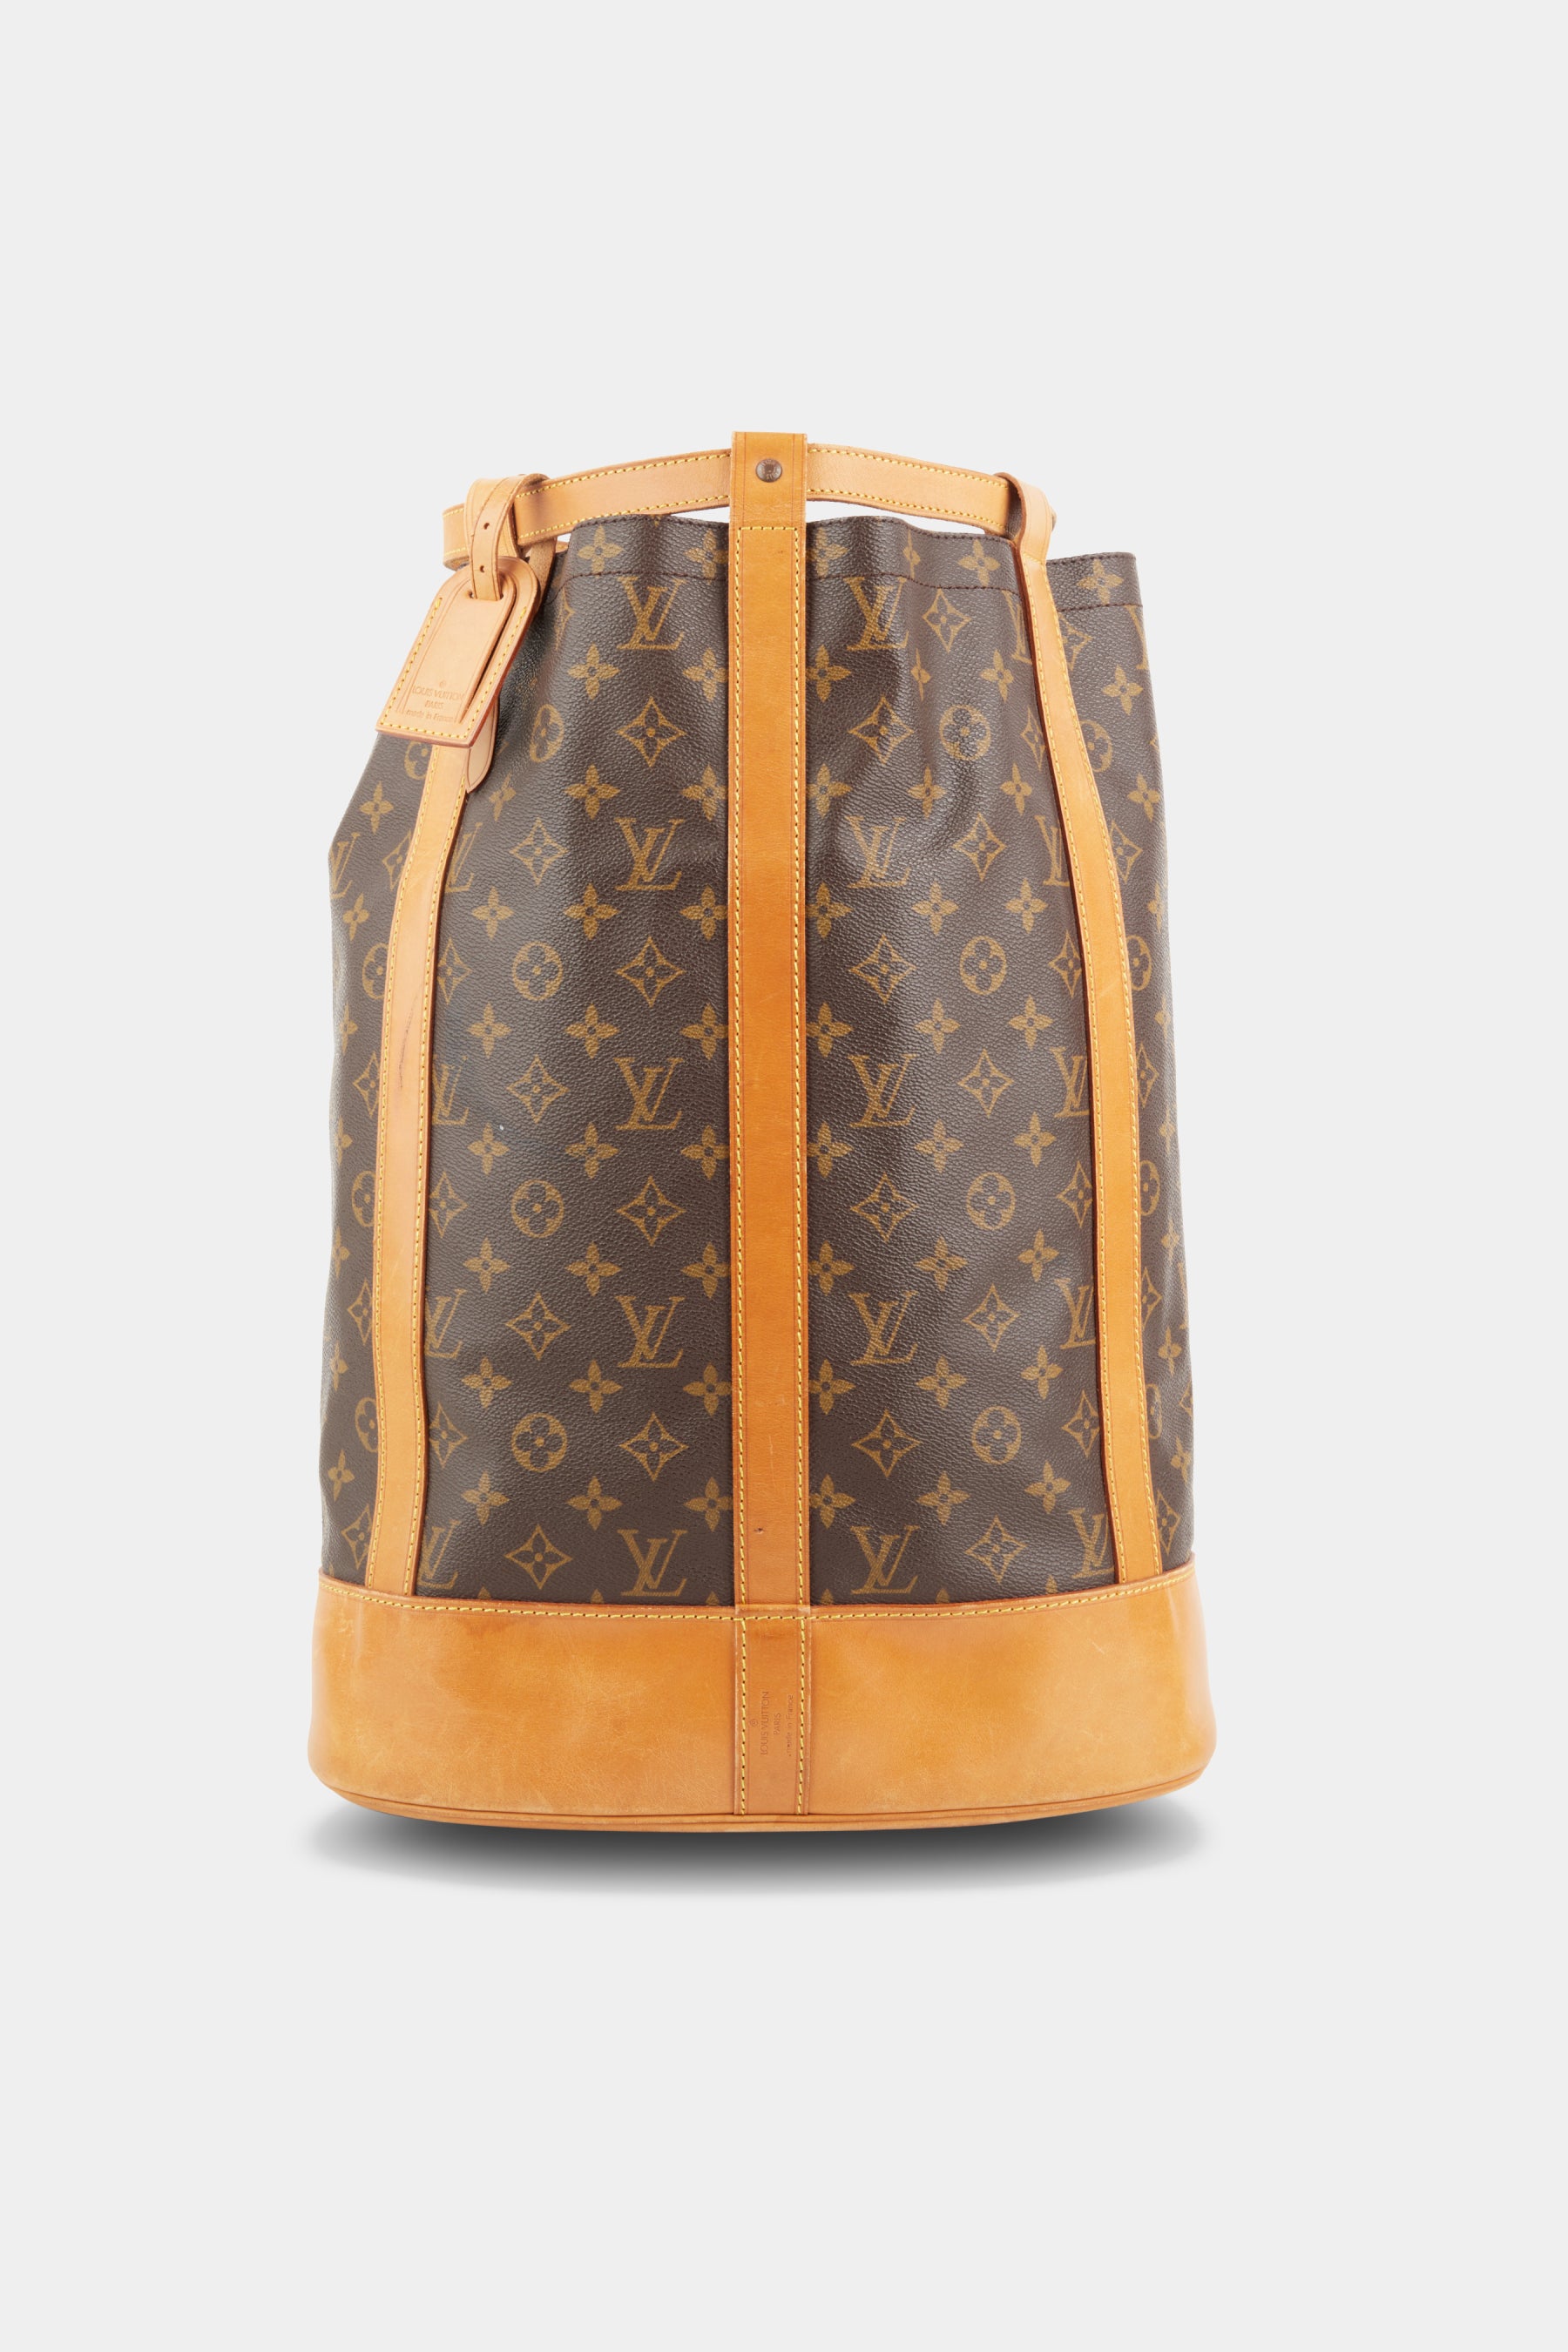 Lord & Taylor Louis - Luggage